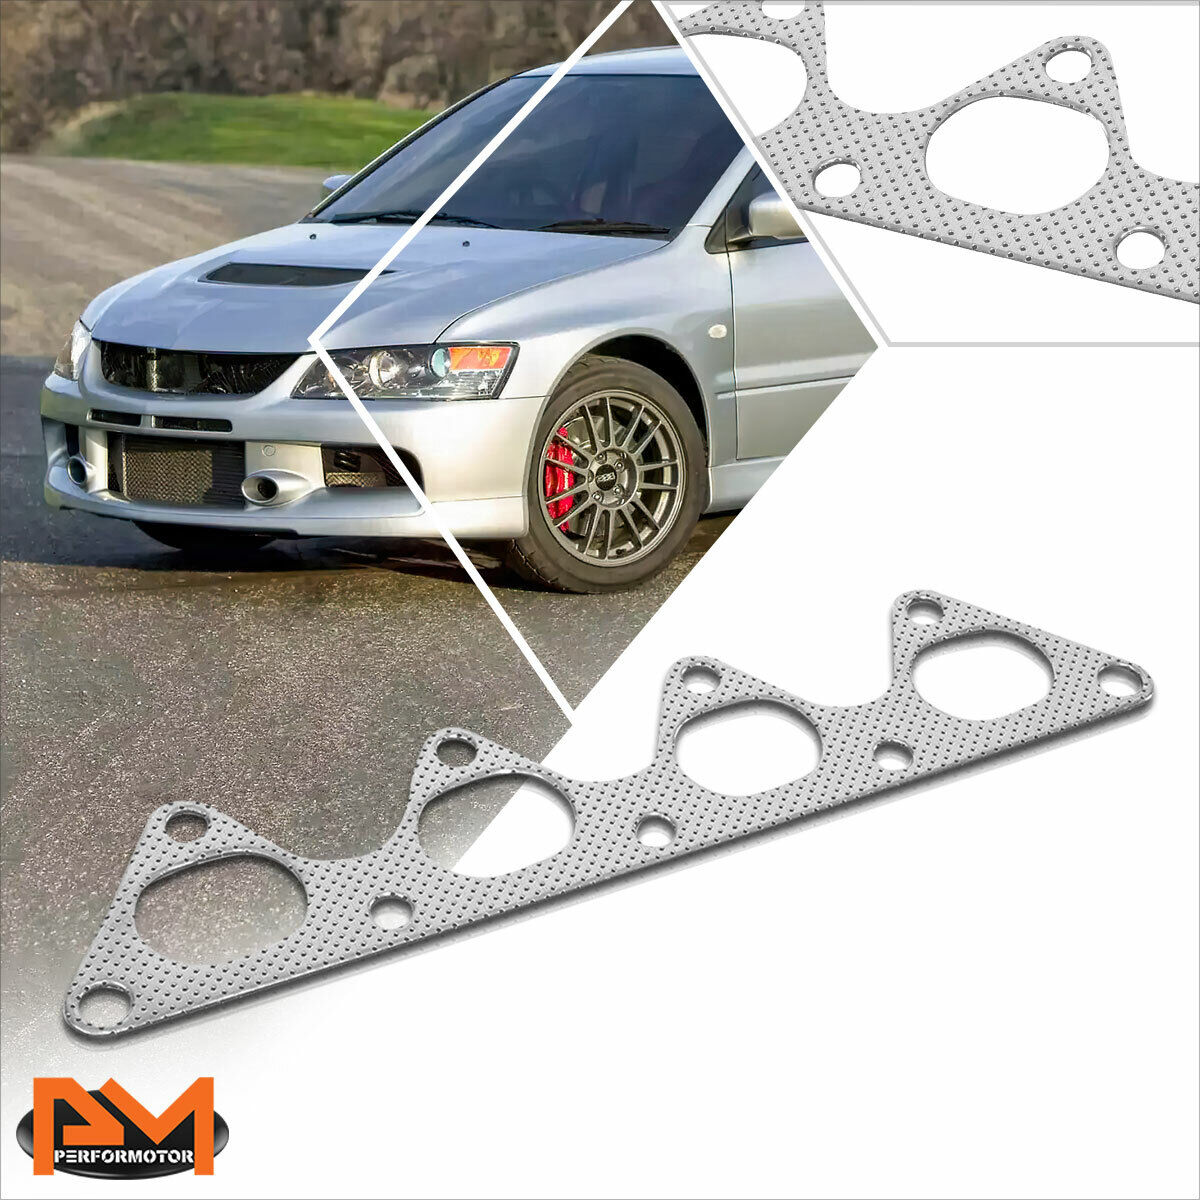 For 92-07 Summit/Colt/Lancer 1.8L 2.0L Exhaust Header Piping Manifold Gasket